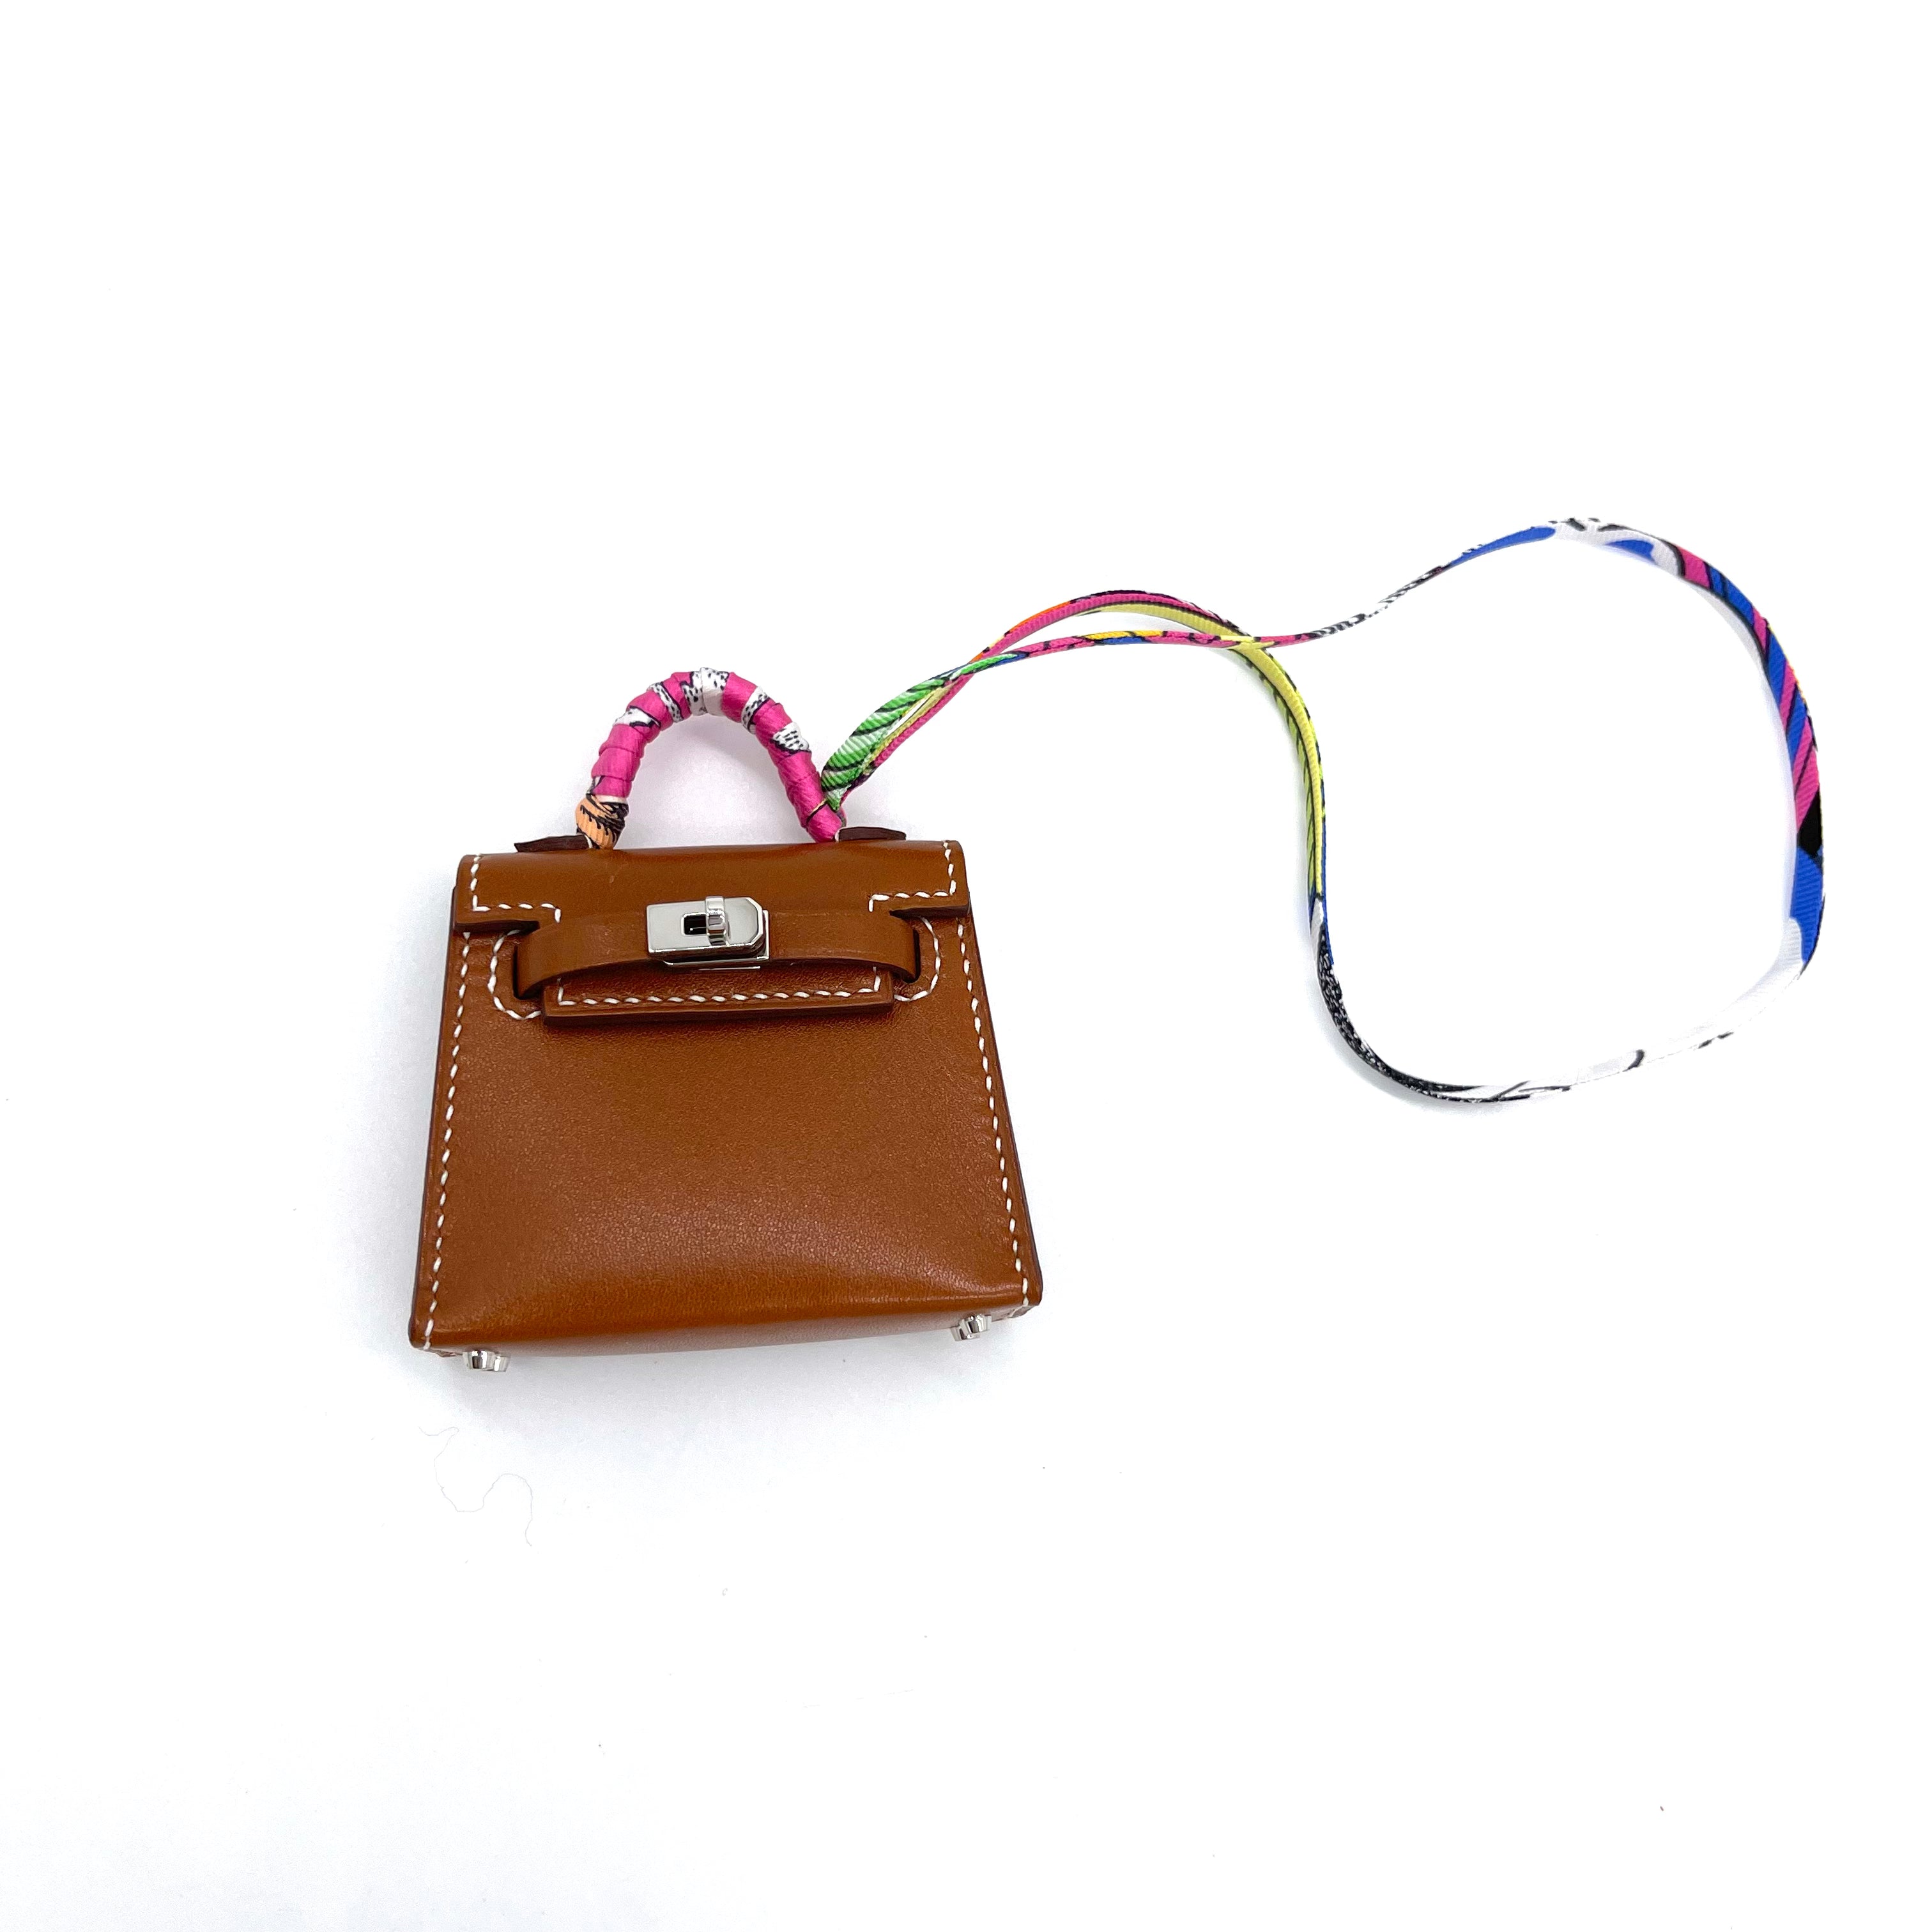 Hermes, Accessories, Hermes Kelly Twilly Bag Charm